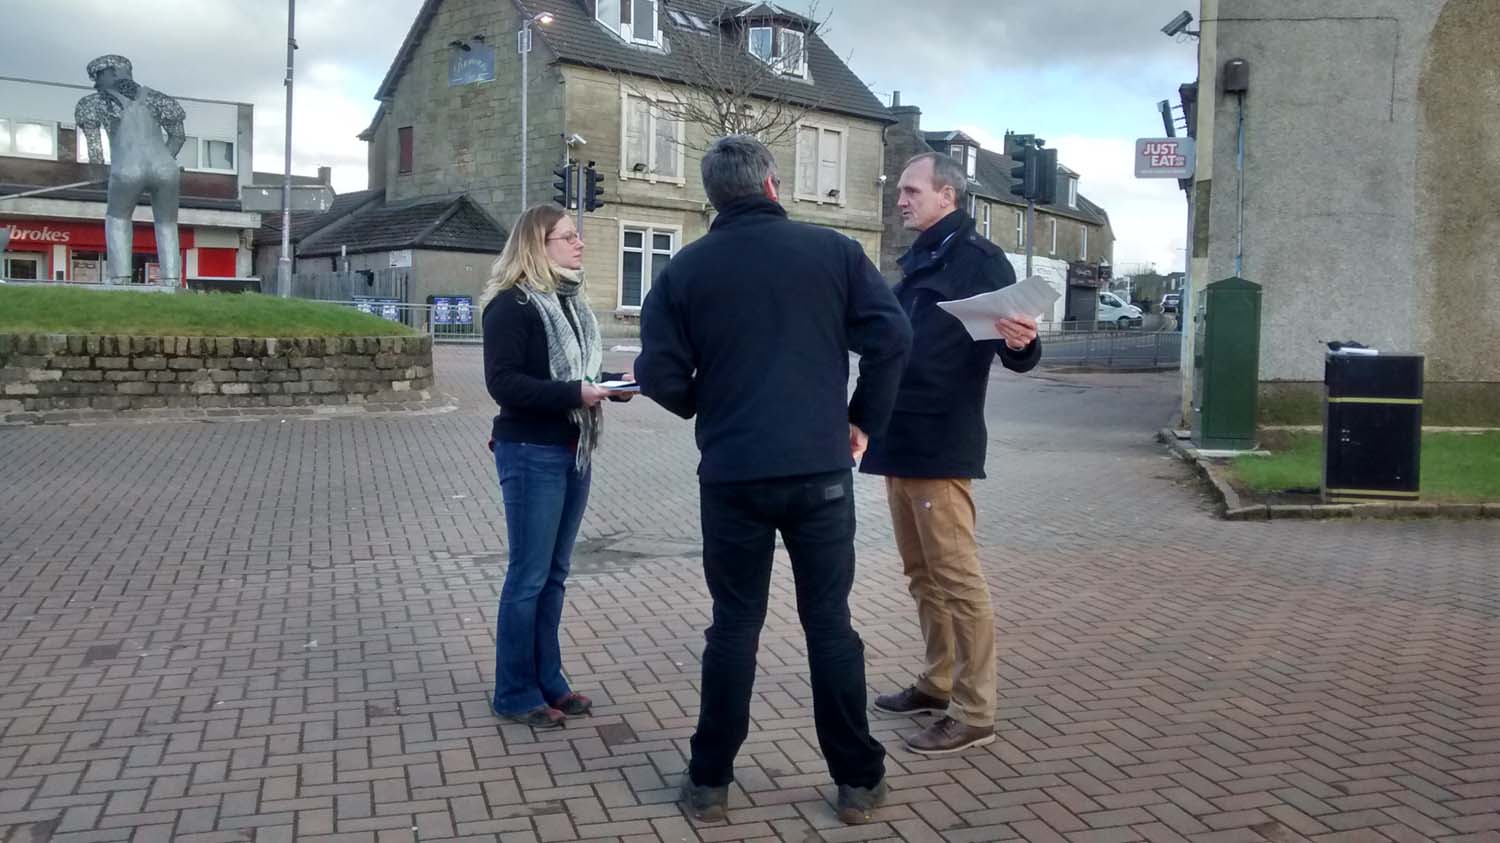 Three people having a conversation about the Place Standard tool beside a building while holding paper.